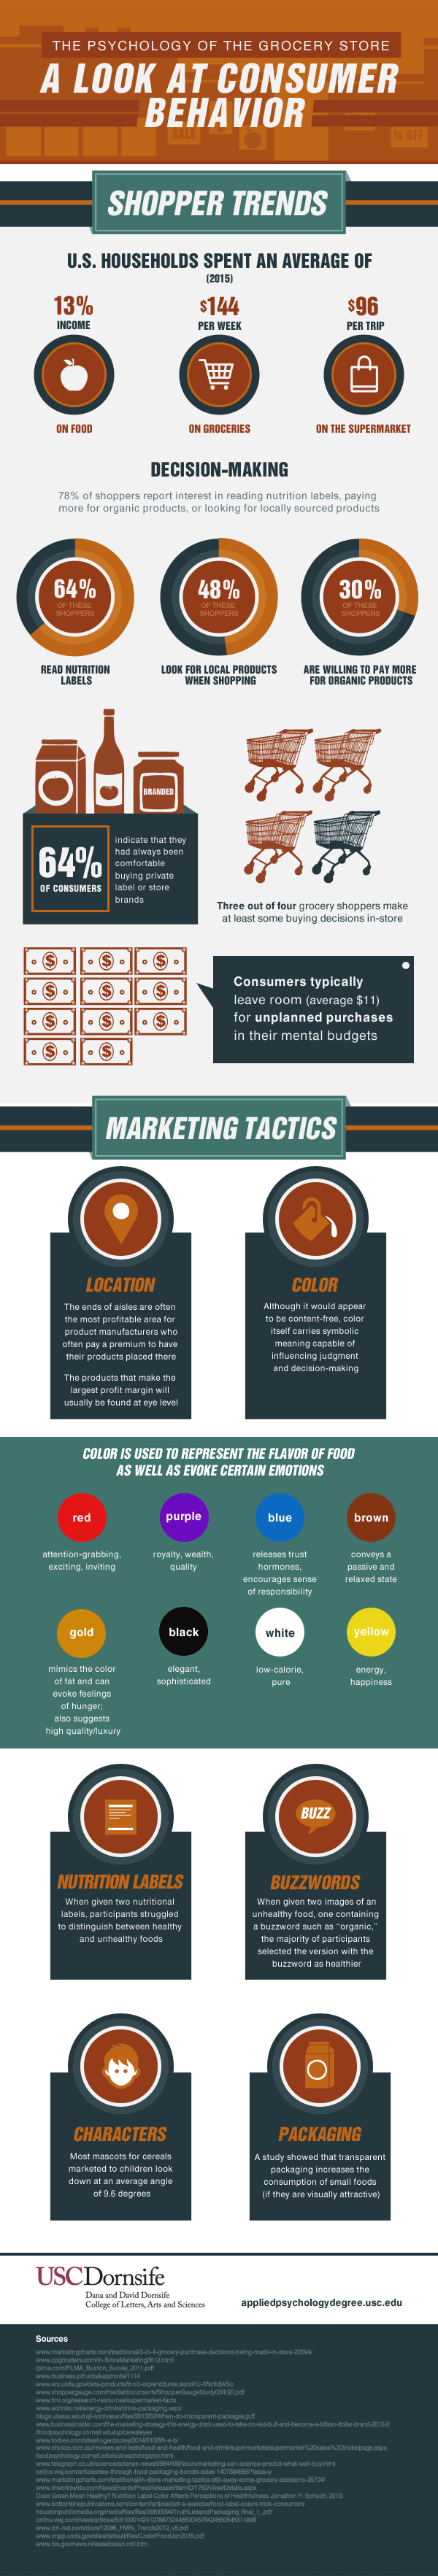 How to Influence Last-Point Purchase Decision: Watch Consumers in Grocery Stores! - Infographic